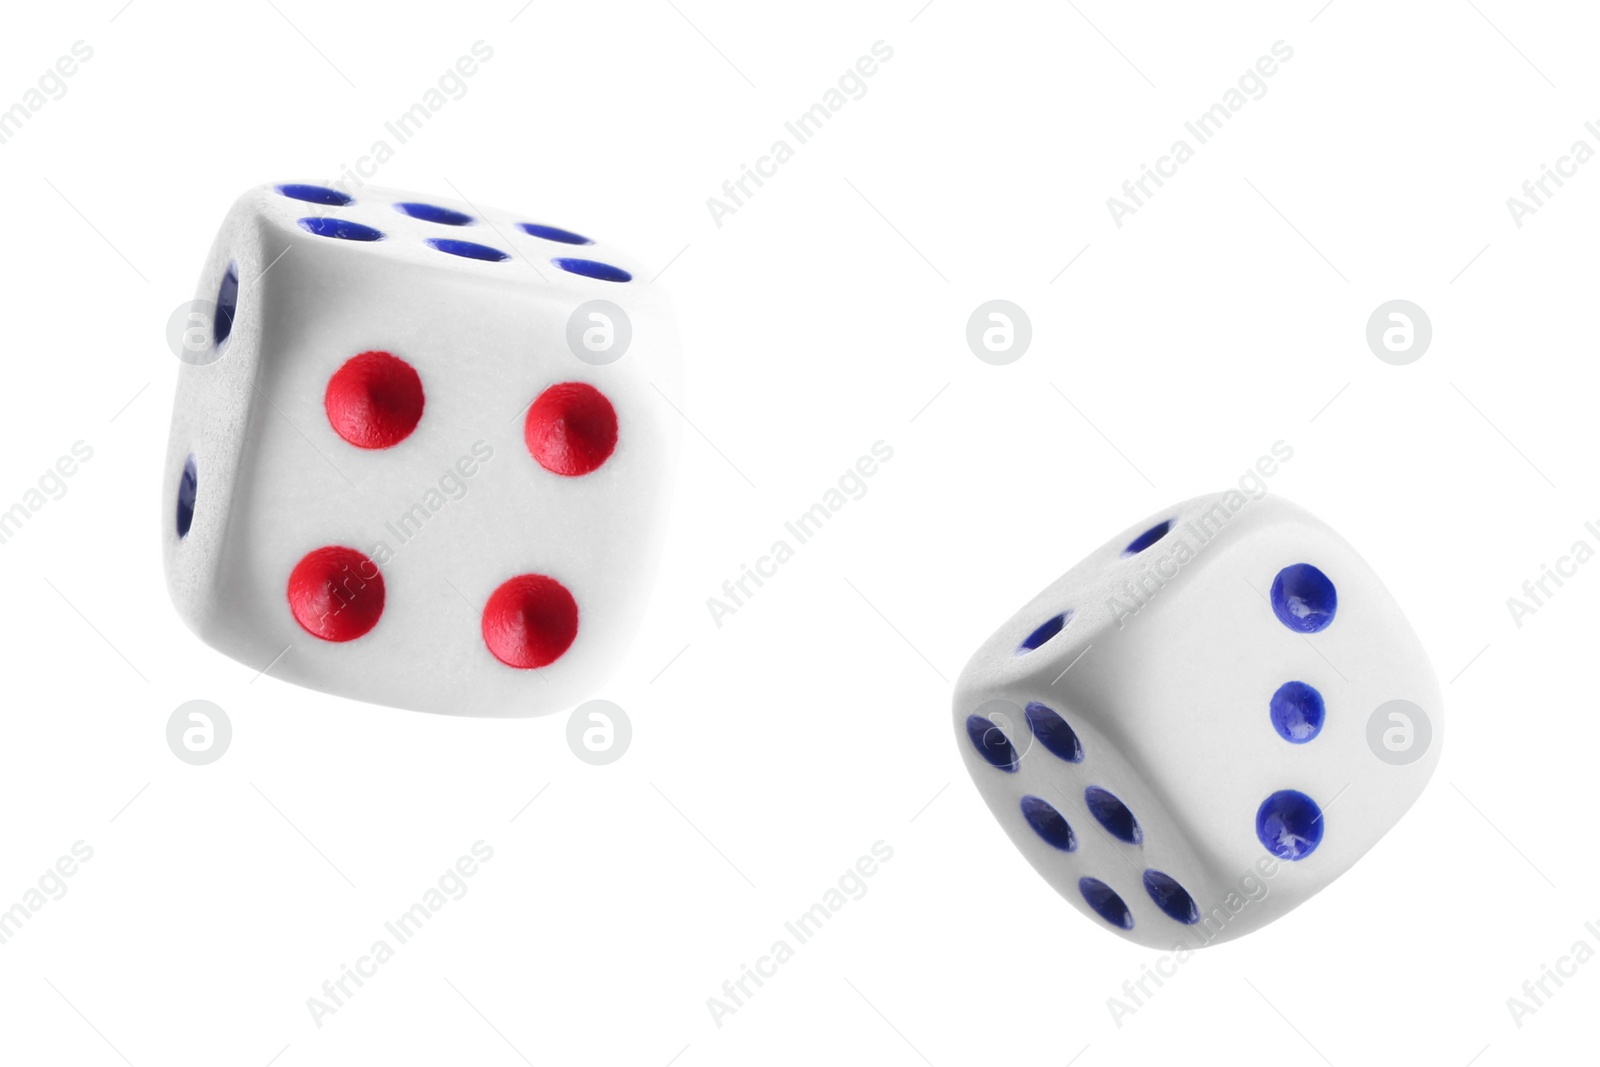 Image of Two dice in air on white background